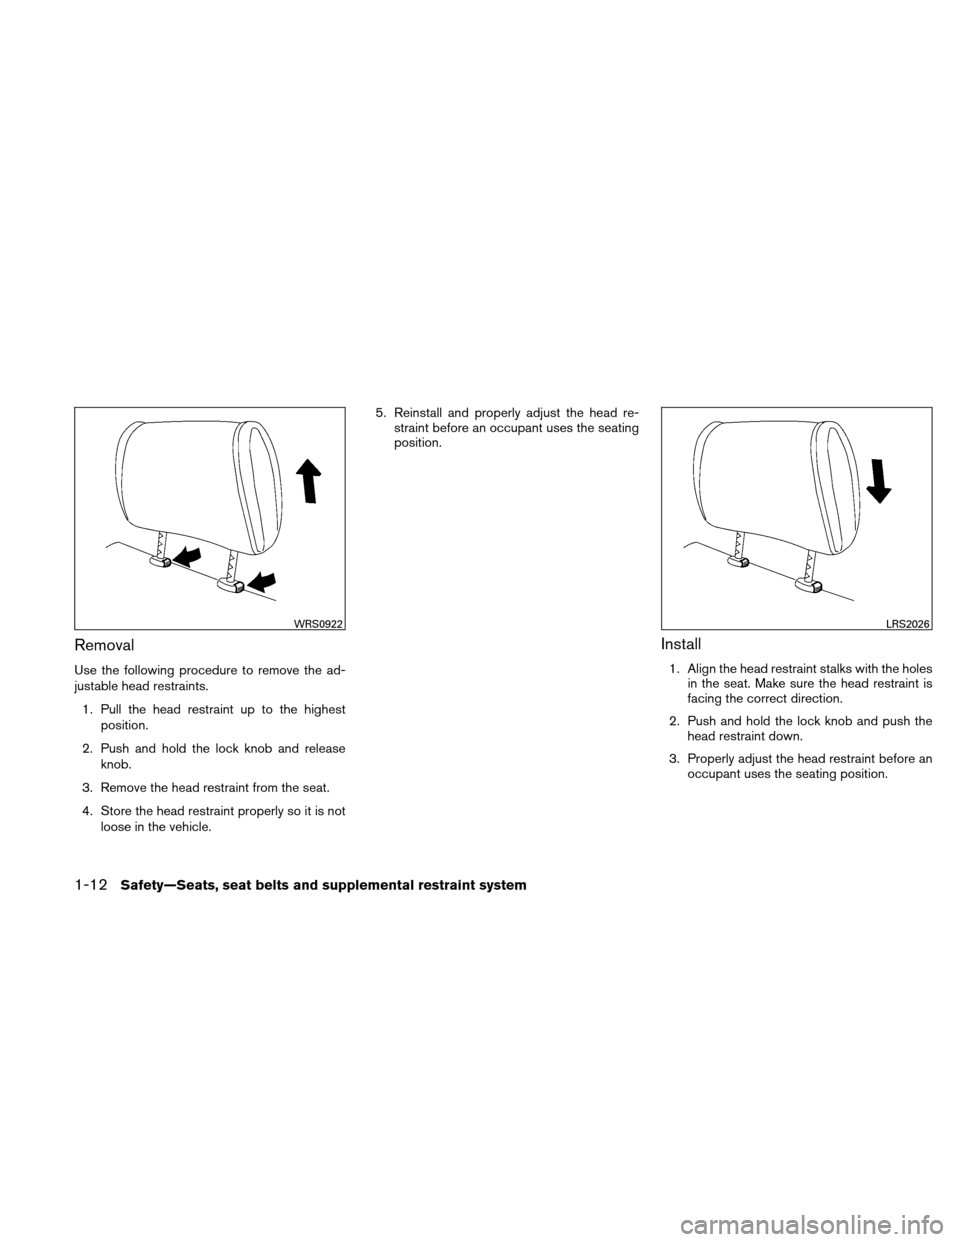 NISSAN ALTIMA COUPE 2011 D32 / 4.G Owners Manual Removal
Use the following procedure to remove the ad-
justable head restraints.1. Pull the head restraint up to the highest position.
2. Push and hold the lock knob and release knob.
3. Remove the hea